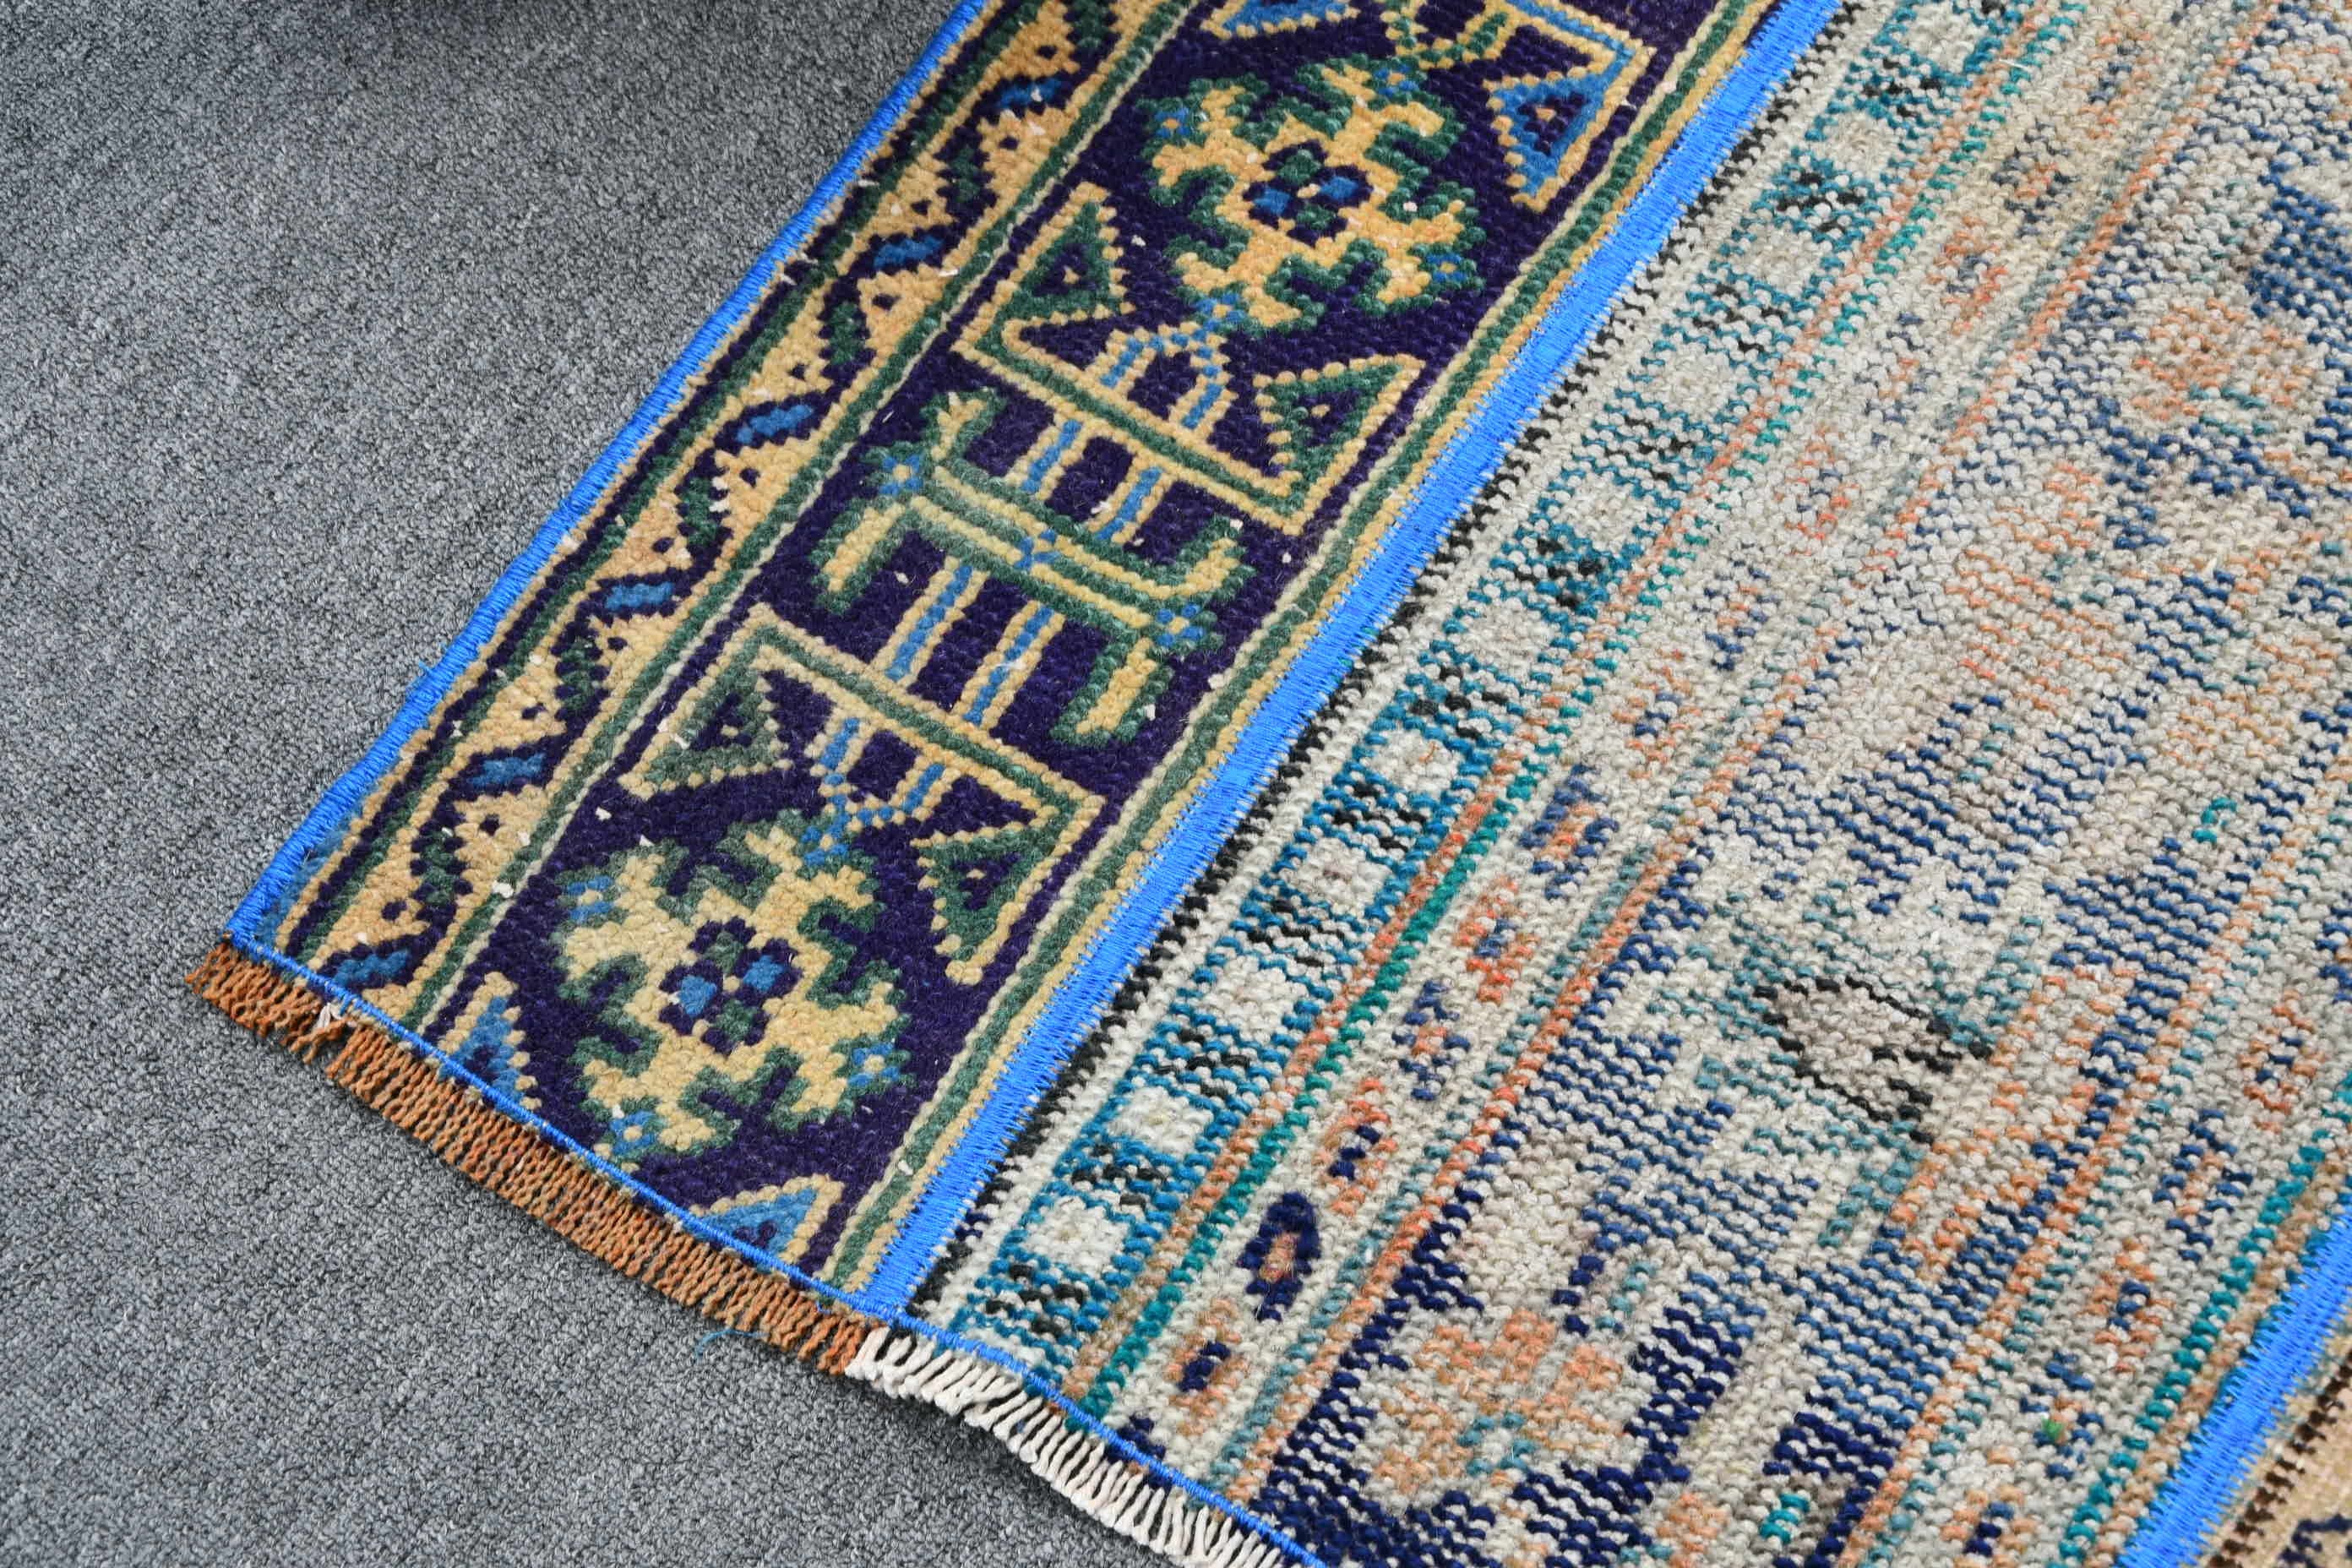 Blue Anatolian Rugs, Old Rug, Kitchen Rugs, 2.4x7.7 ft Runner Rugs, Vintage Rug, Anatolian Rugs, Bedroom Rug, Rugs for Stair, Turkish Rugs